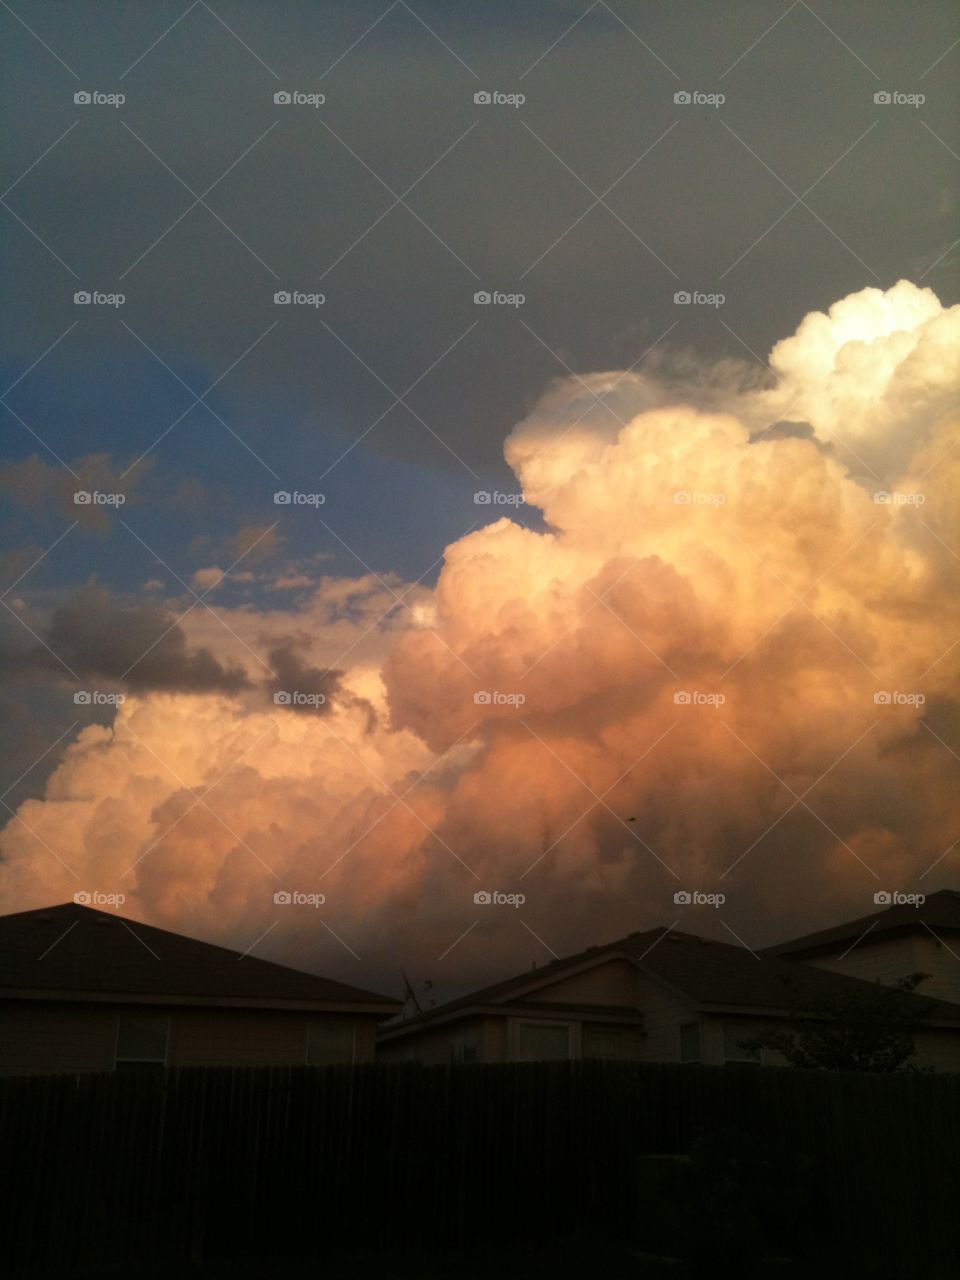 Large storm clouds over houses, clouds lit by sunlight, white thunderhead clouds, rain clouds